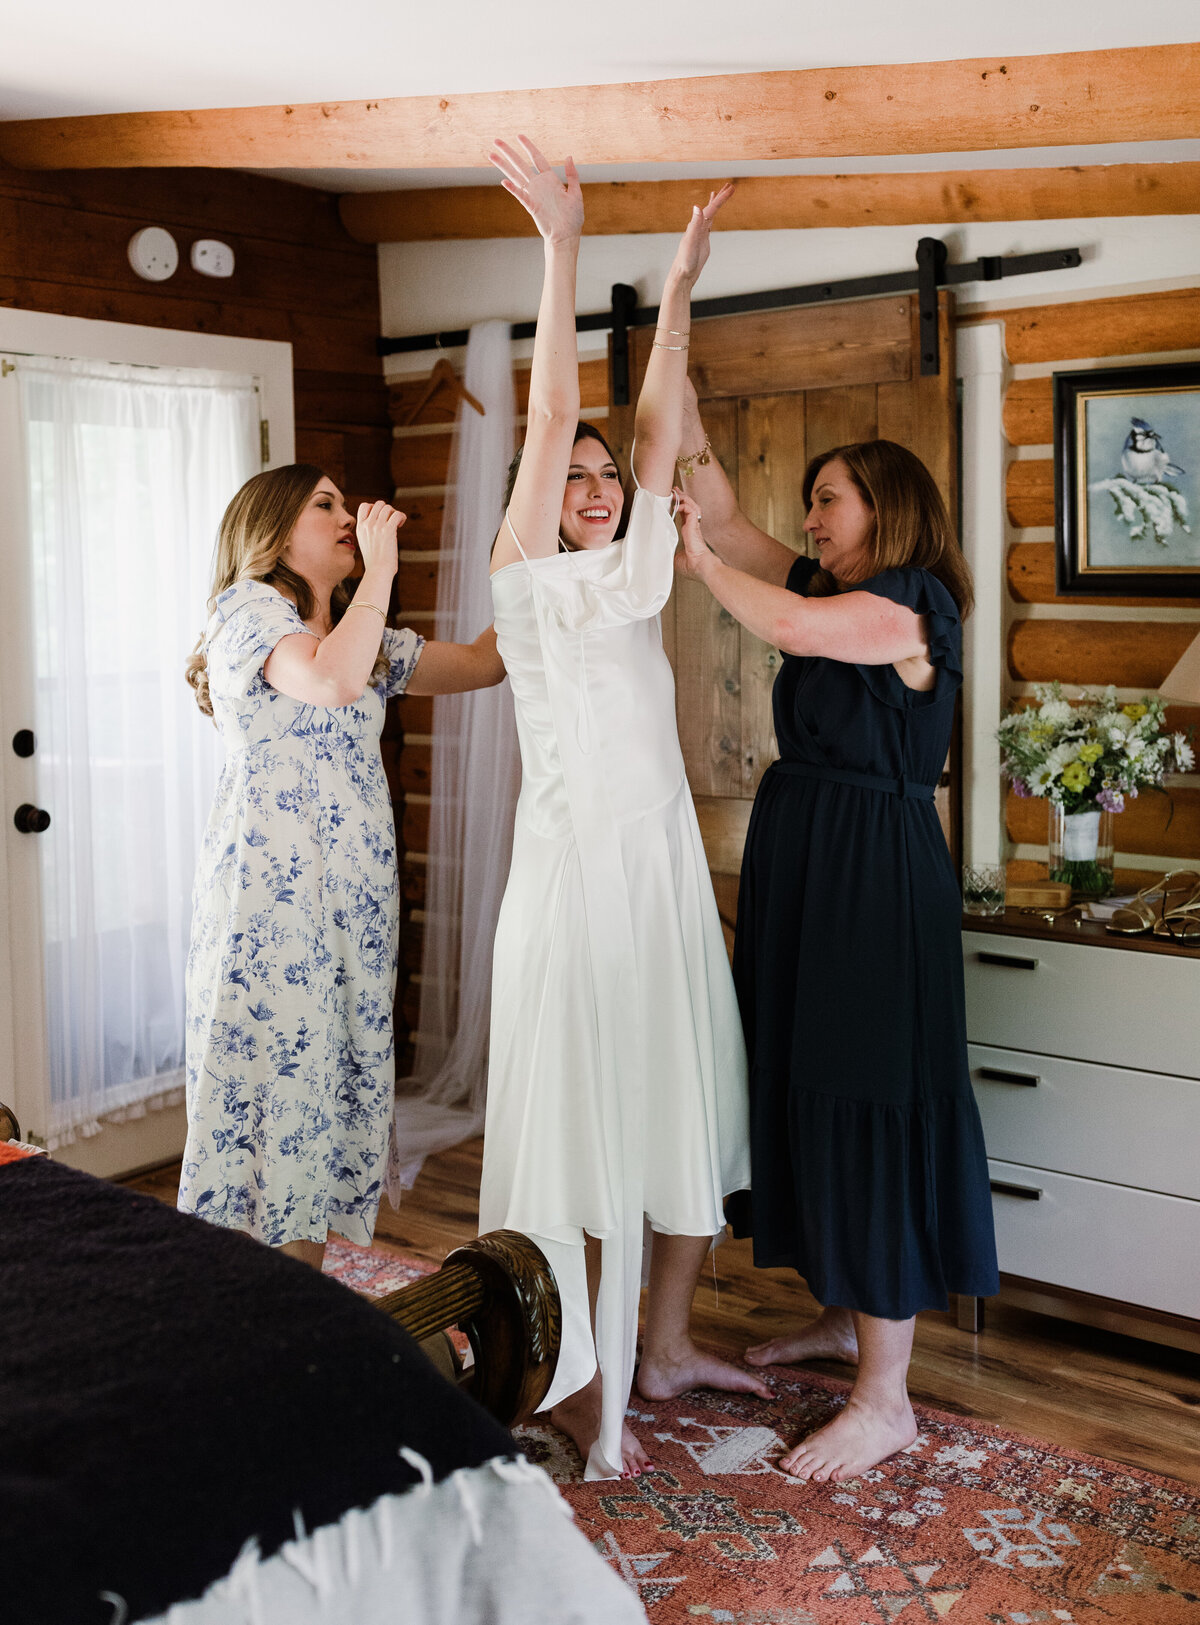 Bride getting into bridal gown helped by two ladies